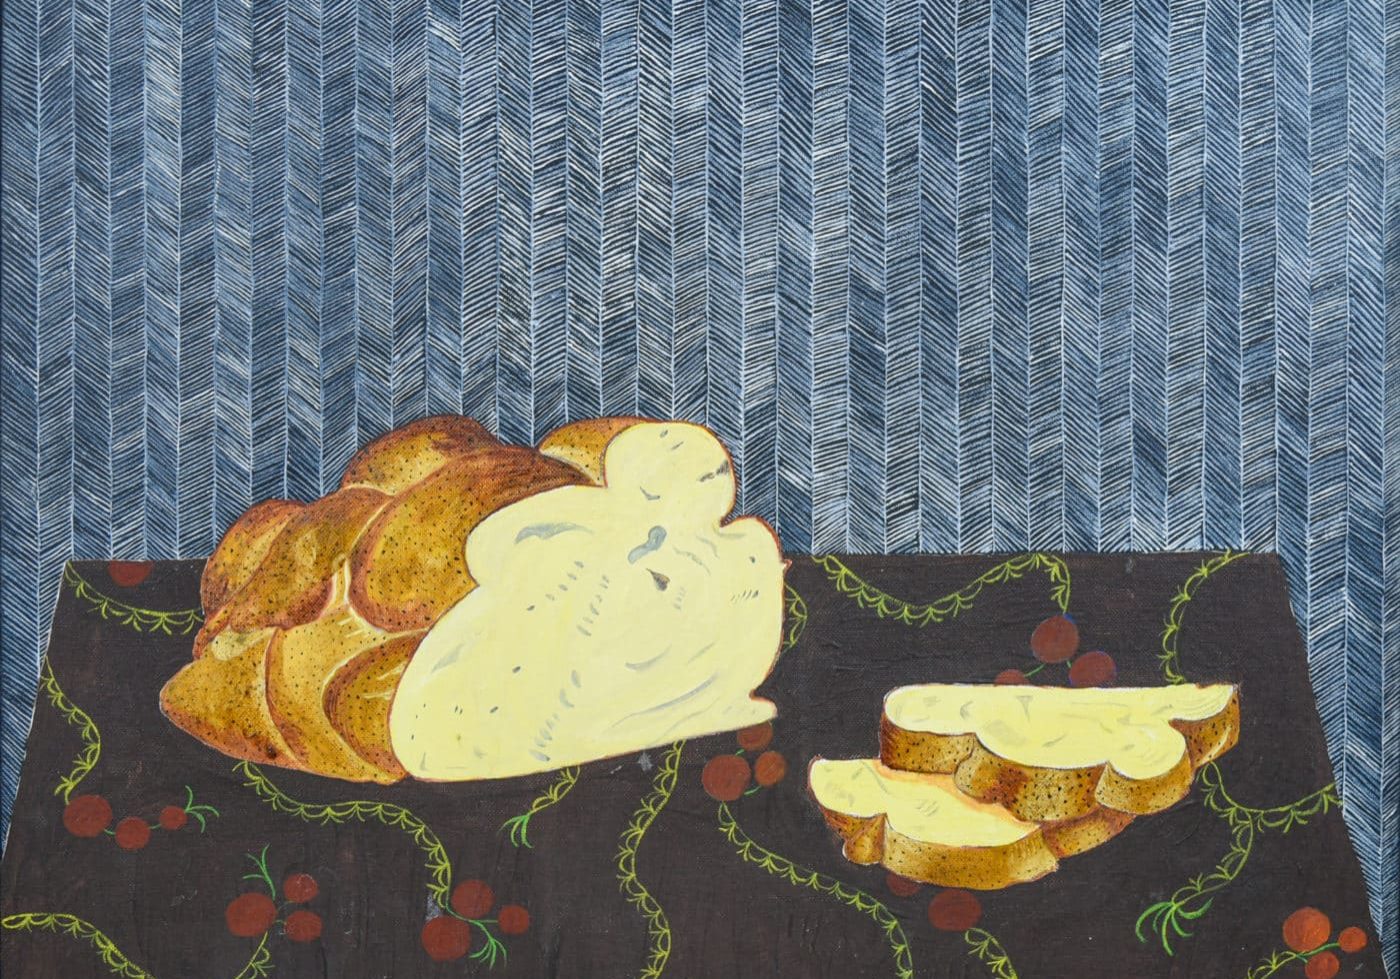 <i>Sliced Loaf,</i> c. 1968<br> casein on canvas<br>16 x 20 inches<br> Collection of the Stamford Museum & Nature Center<br> Gift of Mr. Charles Regensburg<br>85.7.2